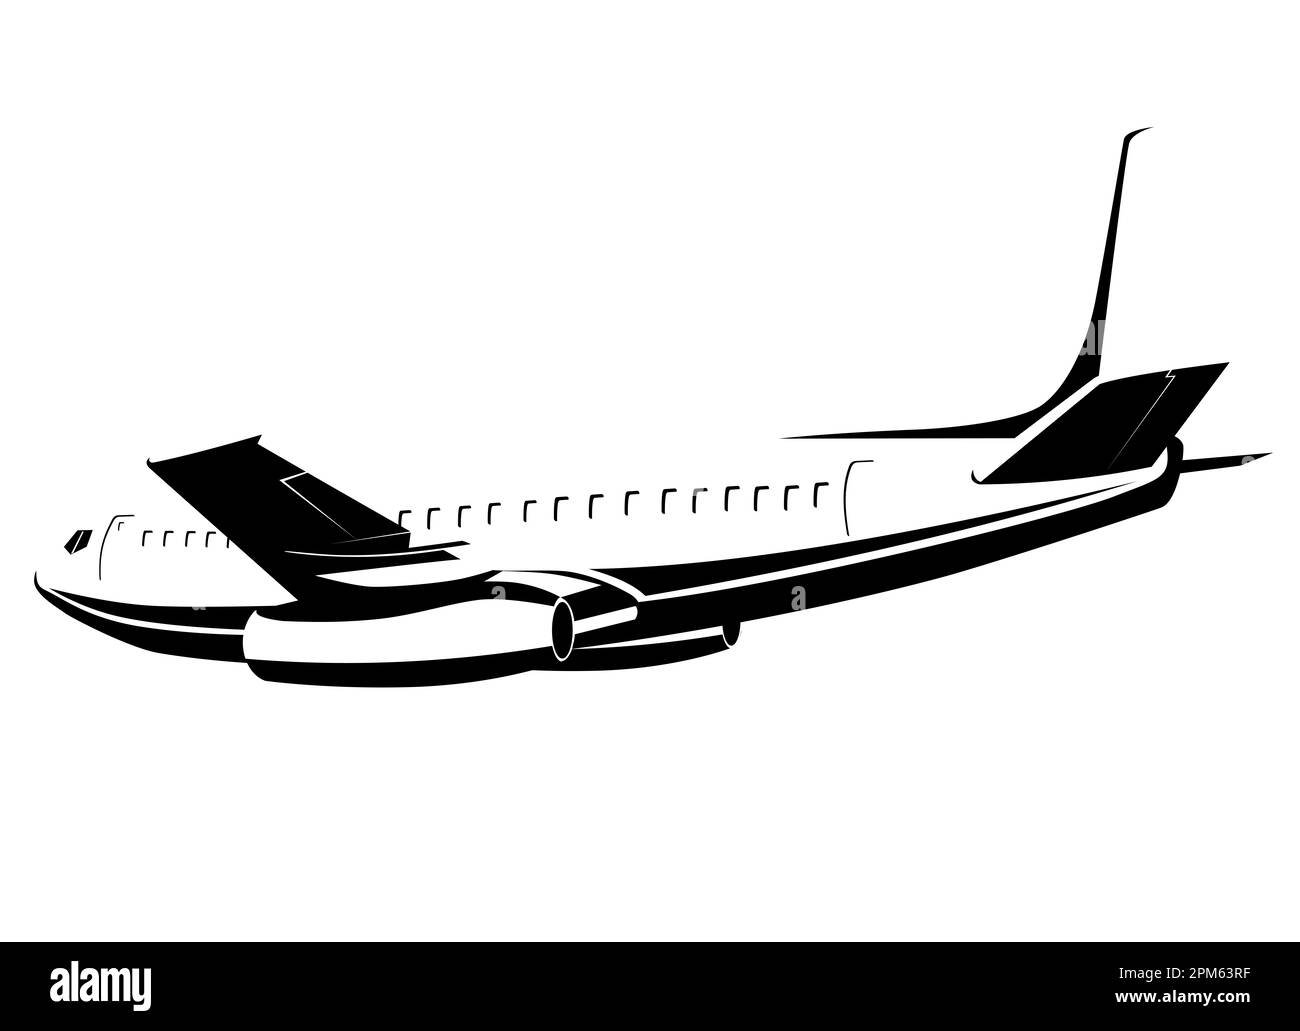 Illustration of a commercial jet plane airliner on full flight flying viewed from side on isolated background done in retro style. Stock Photo